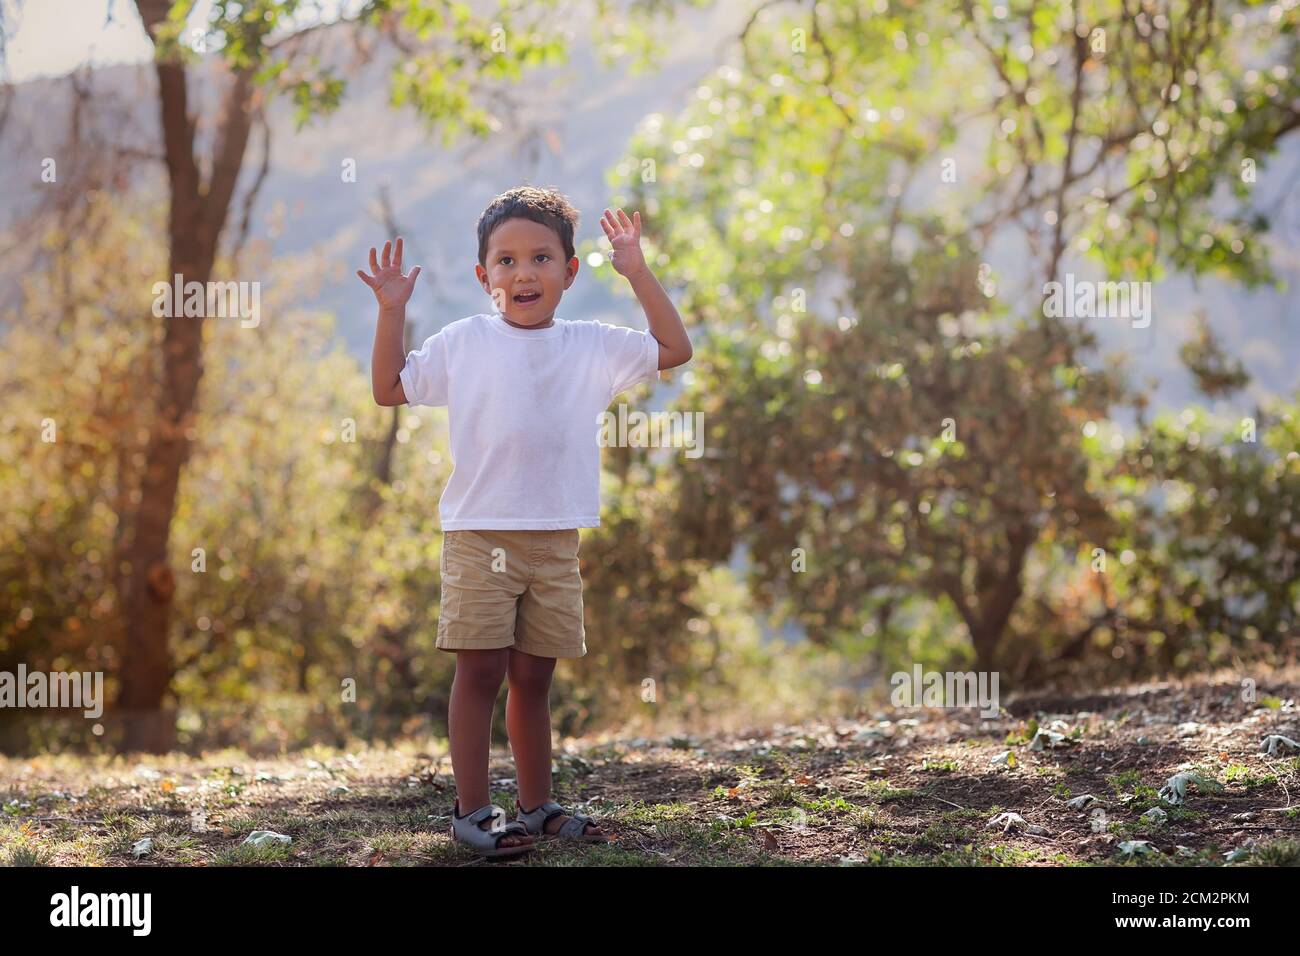 Young boy advancing to preschool age is outdoors learning to catch a ball with  his arms up in the air, in southern California setting. Stock Photo